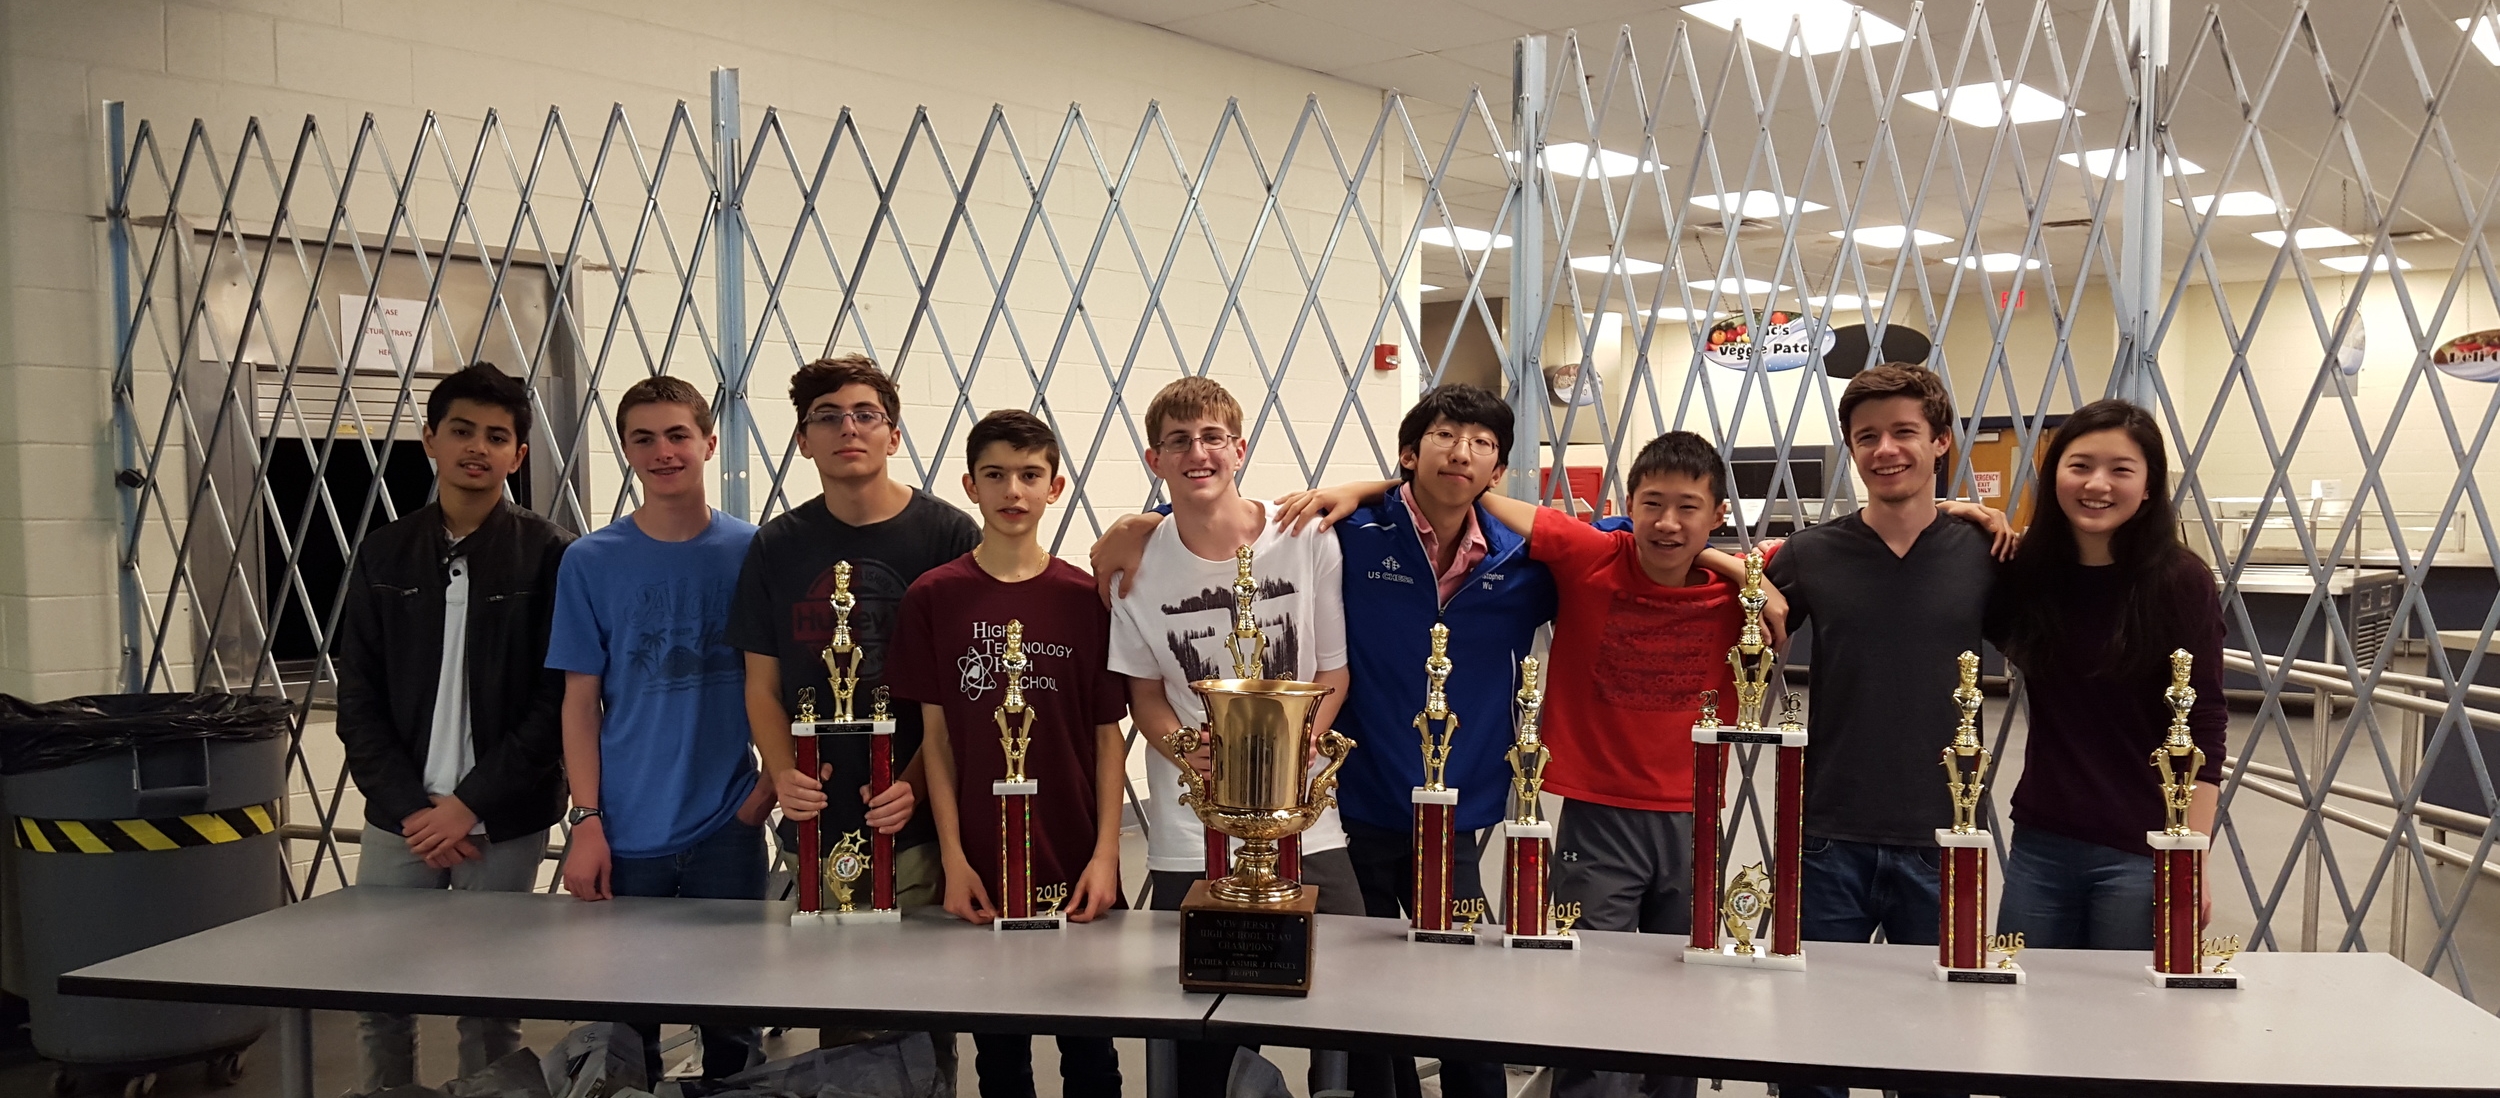 Chess - State Champs 2016 - Trophies.jpg